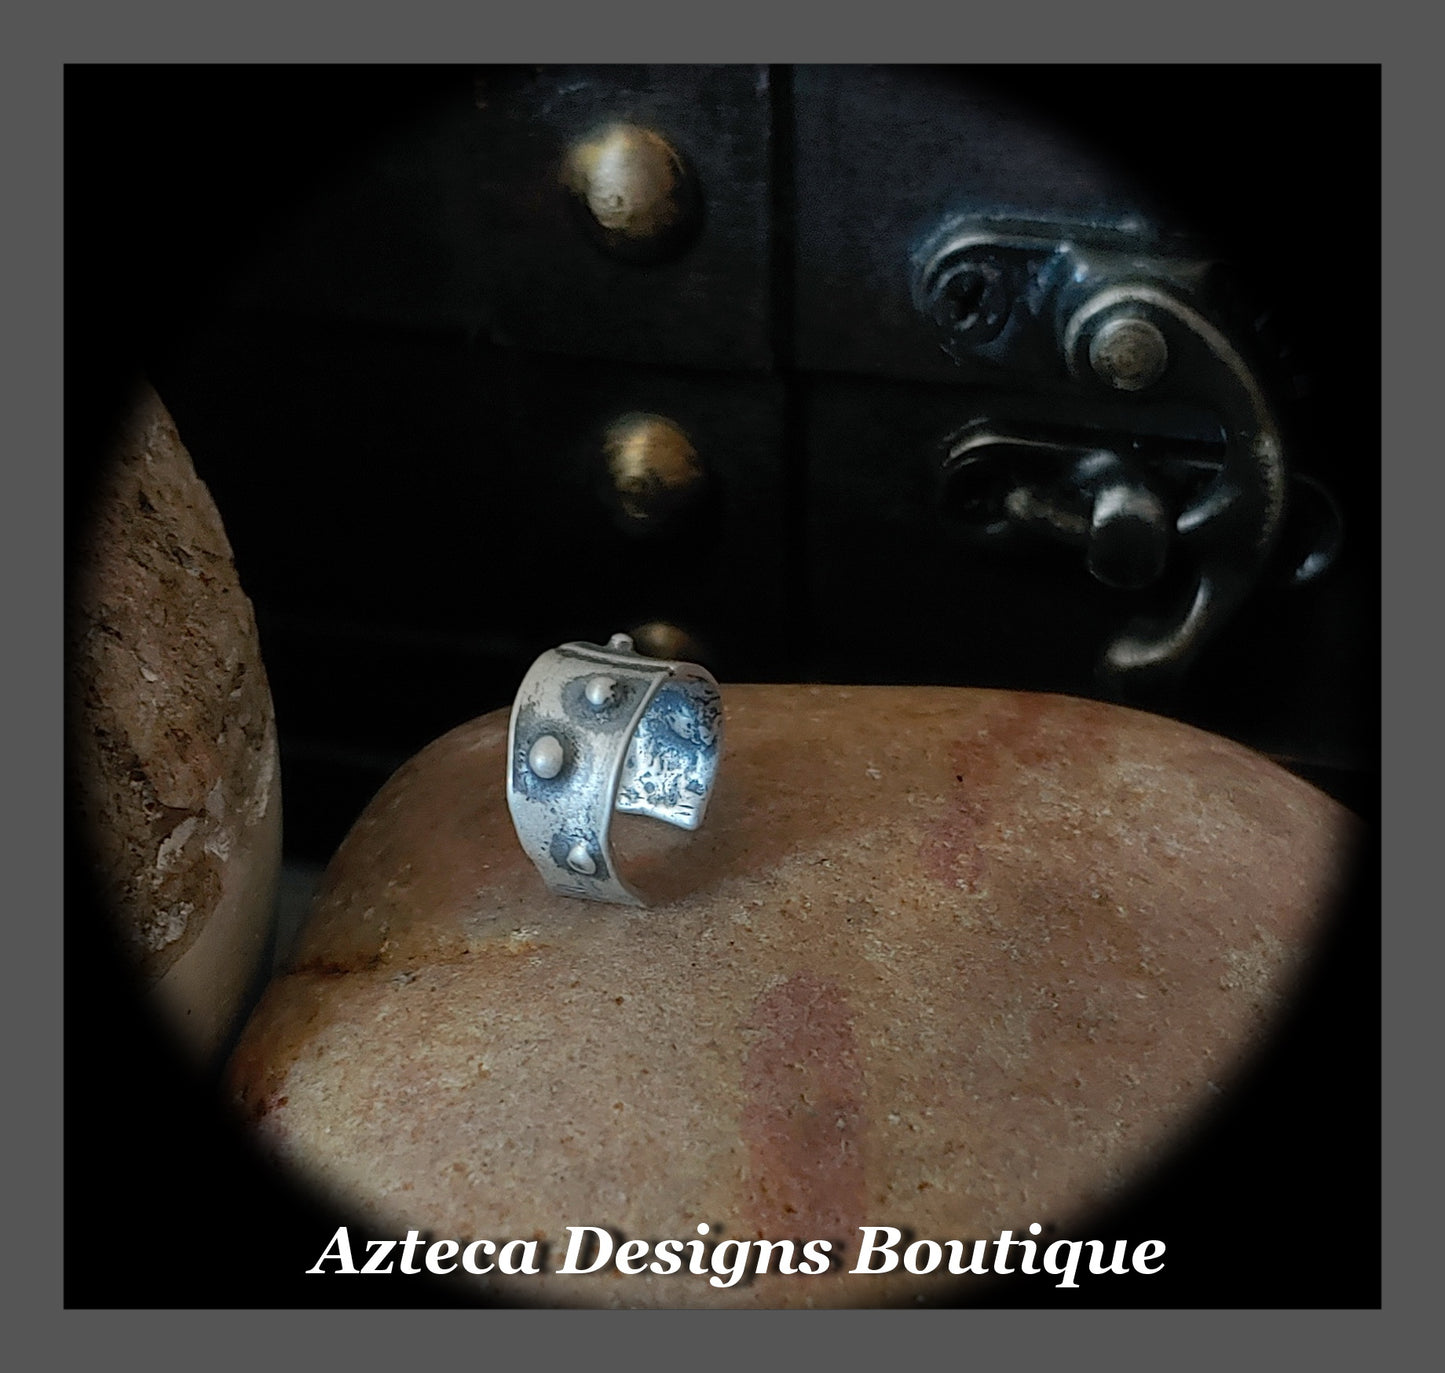 RUSTIC Raised Dot Ear Cuff + Argentium Silver + Hand Fabricated + Standard Size